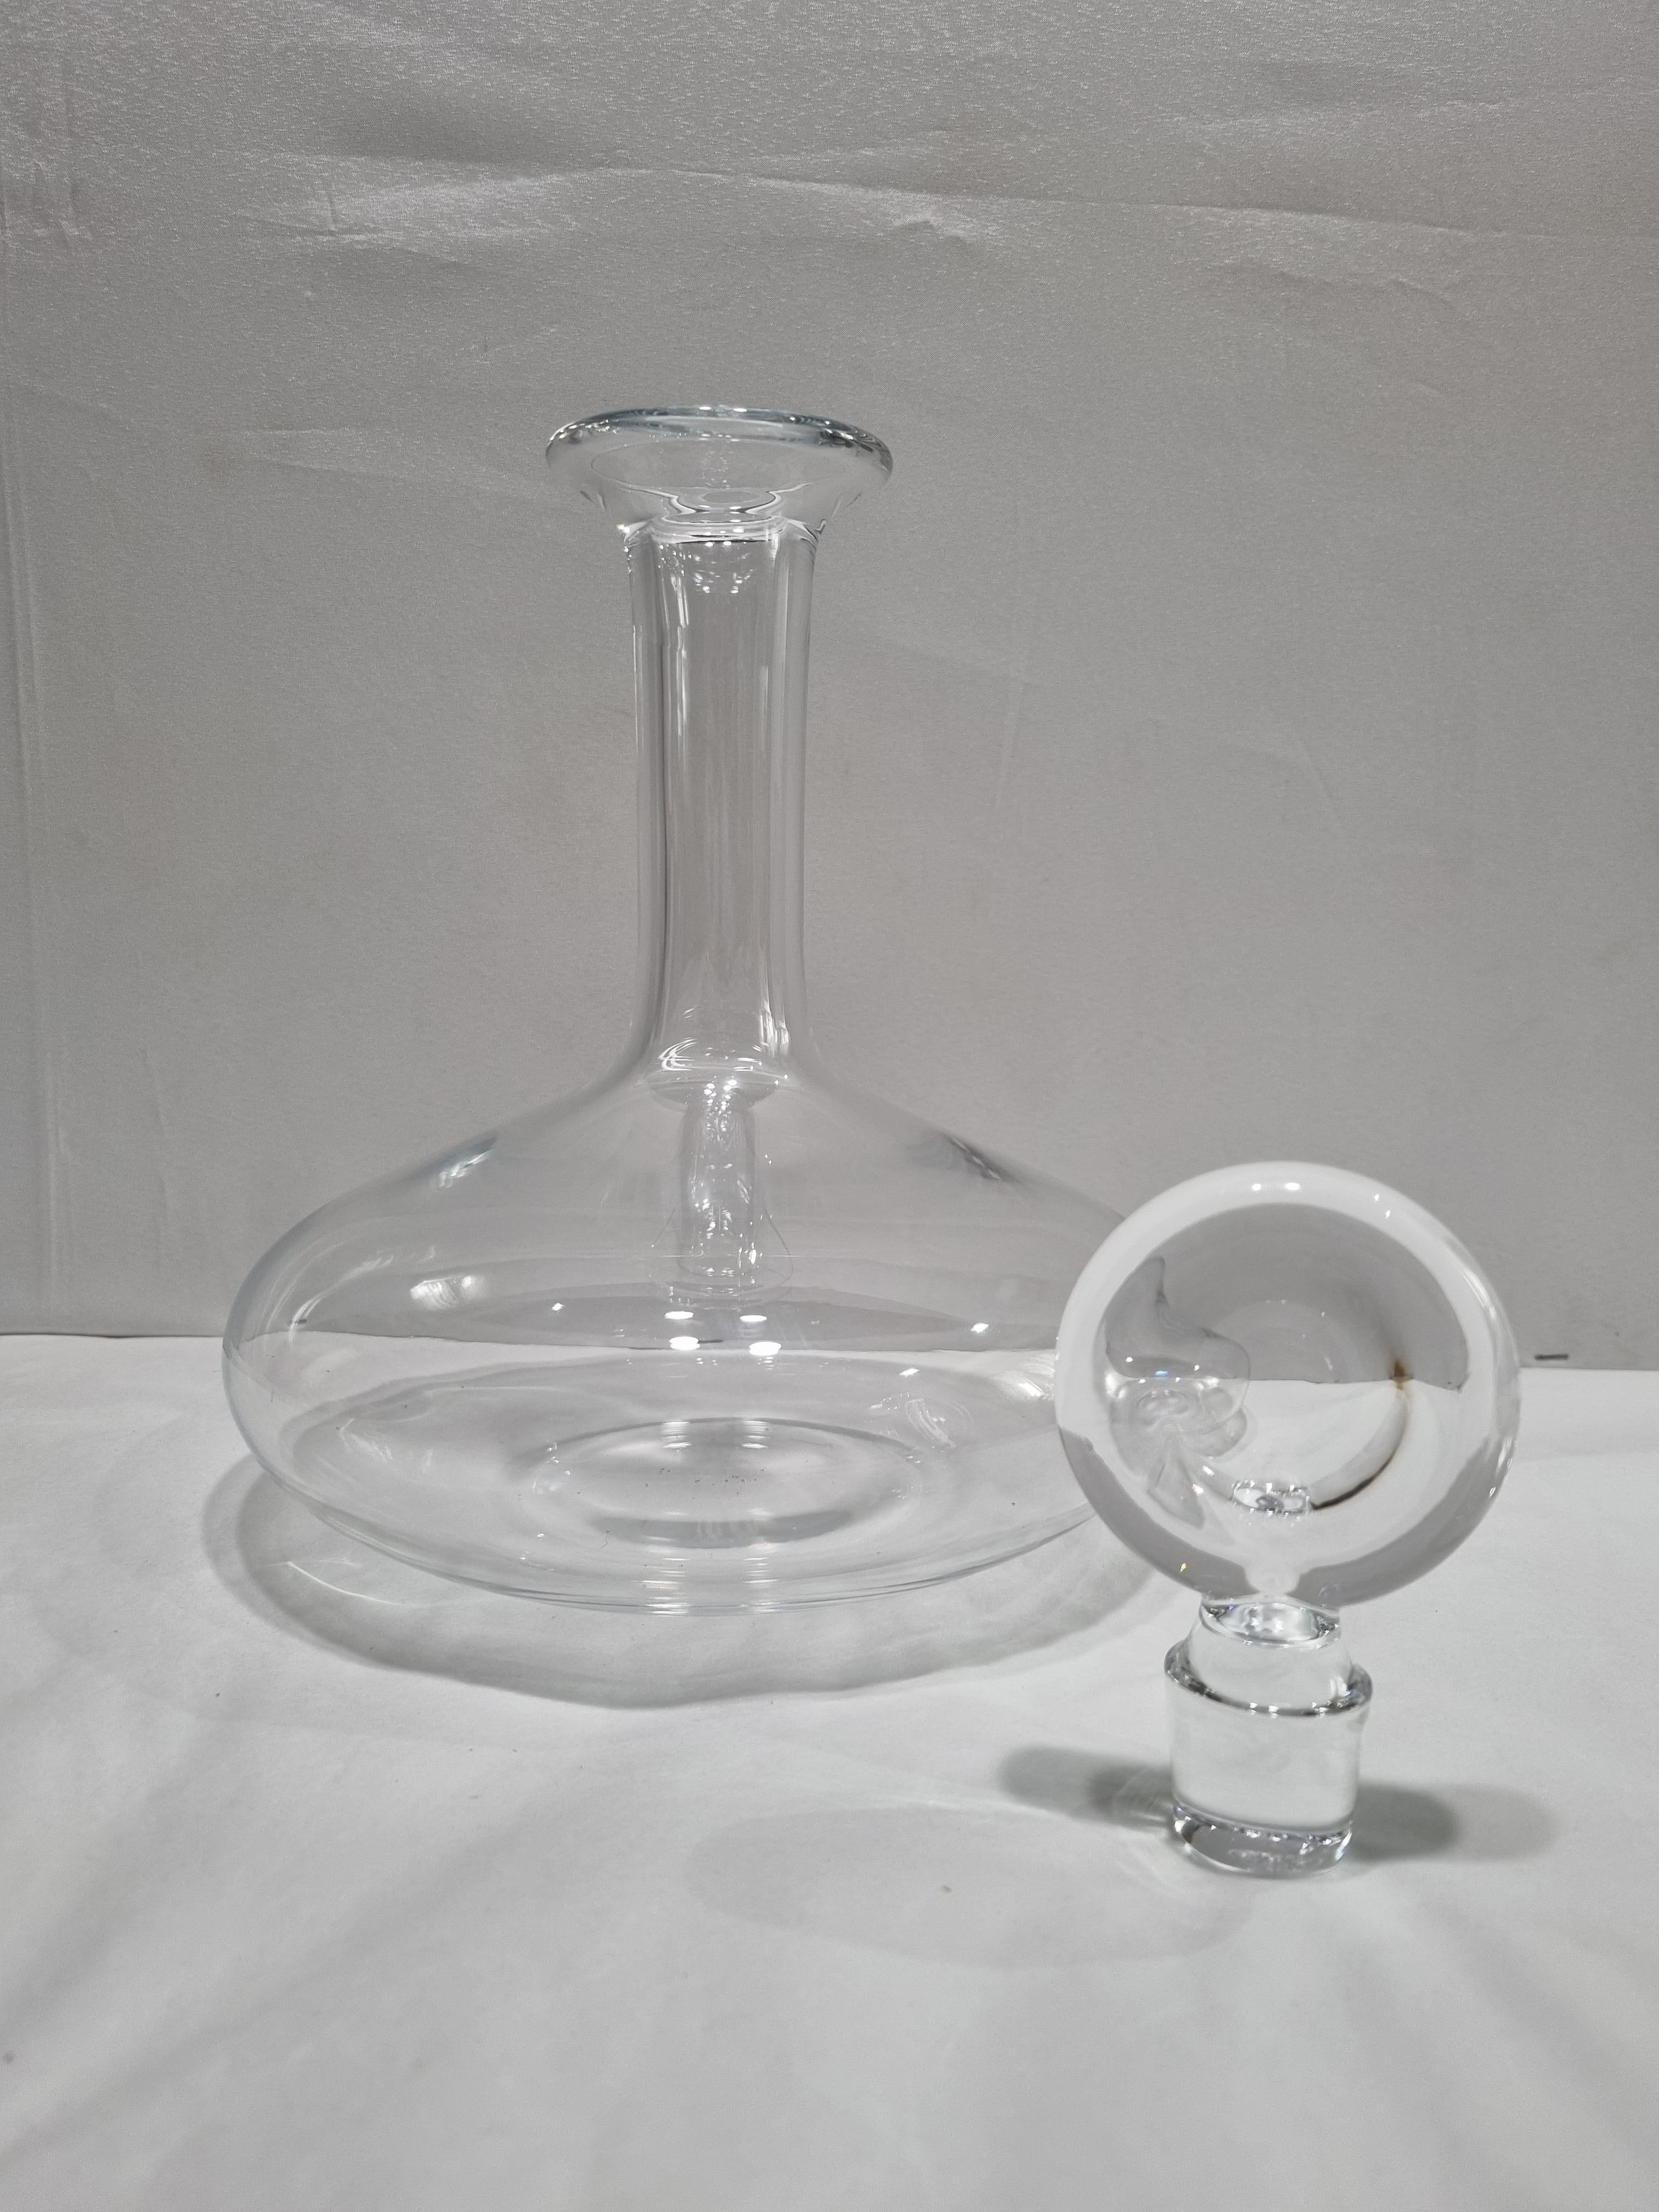 The « Oenologie » decanter in clear crystal is ideal for airing a young wine and releasing its flavors. The shape recalls the volumetric bottles seen in laboratories.
Decanting a young wine allows its aromas to develop and be savored later: airing